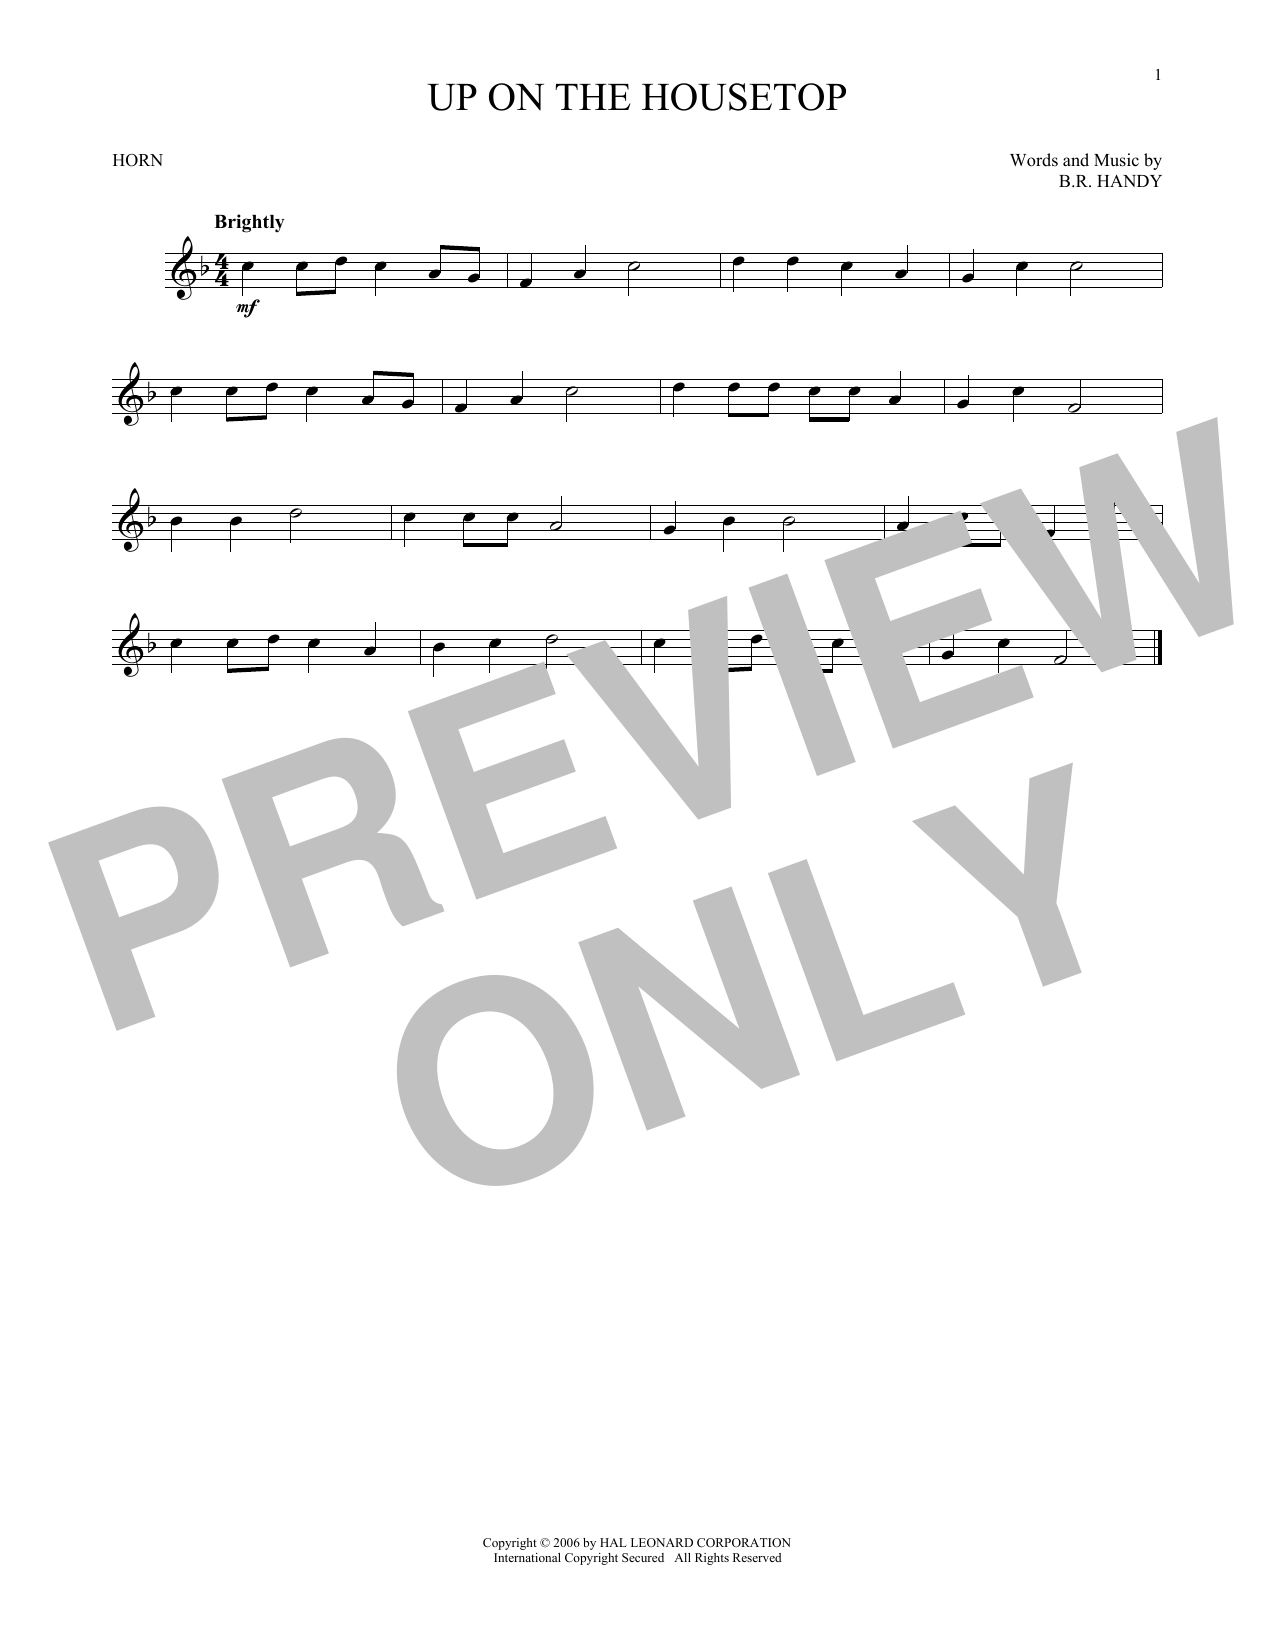 Up On The Housetop (French Horn Solo) von B.R. Hanby